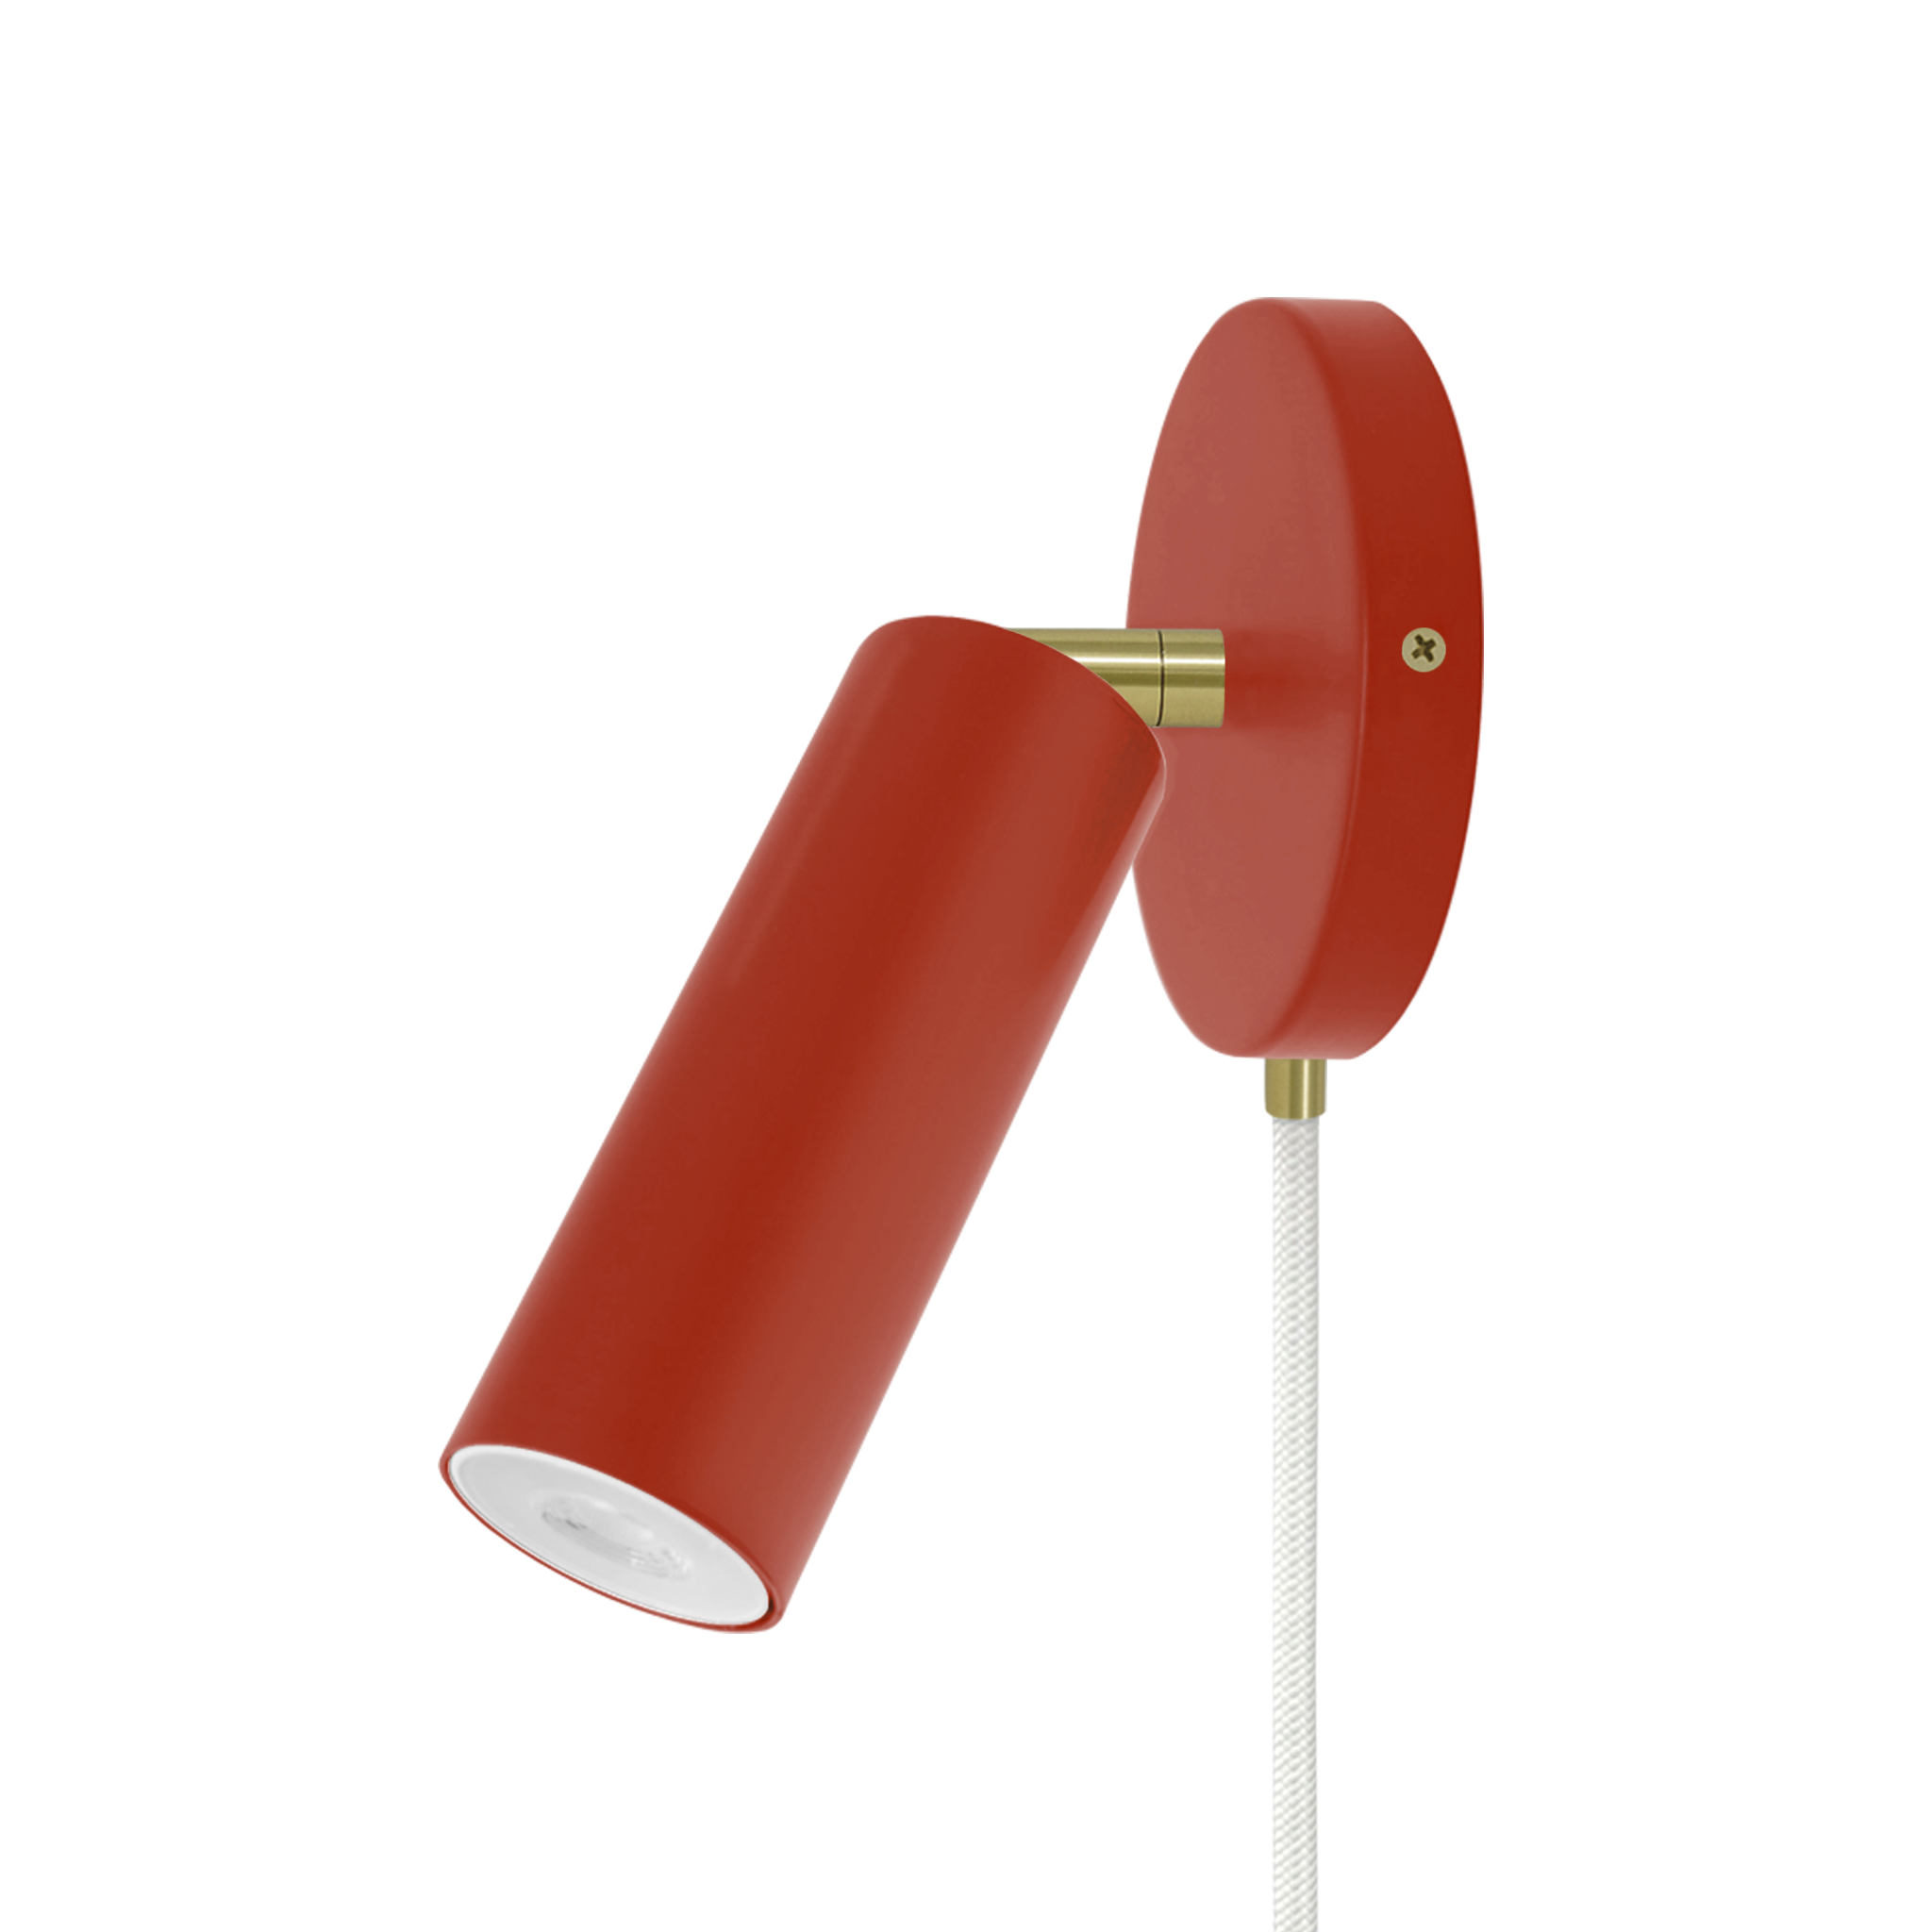 Brass and riding hood red color Reader plug-in sconce no arm Dutton Brown lighting